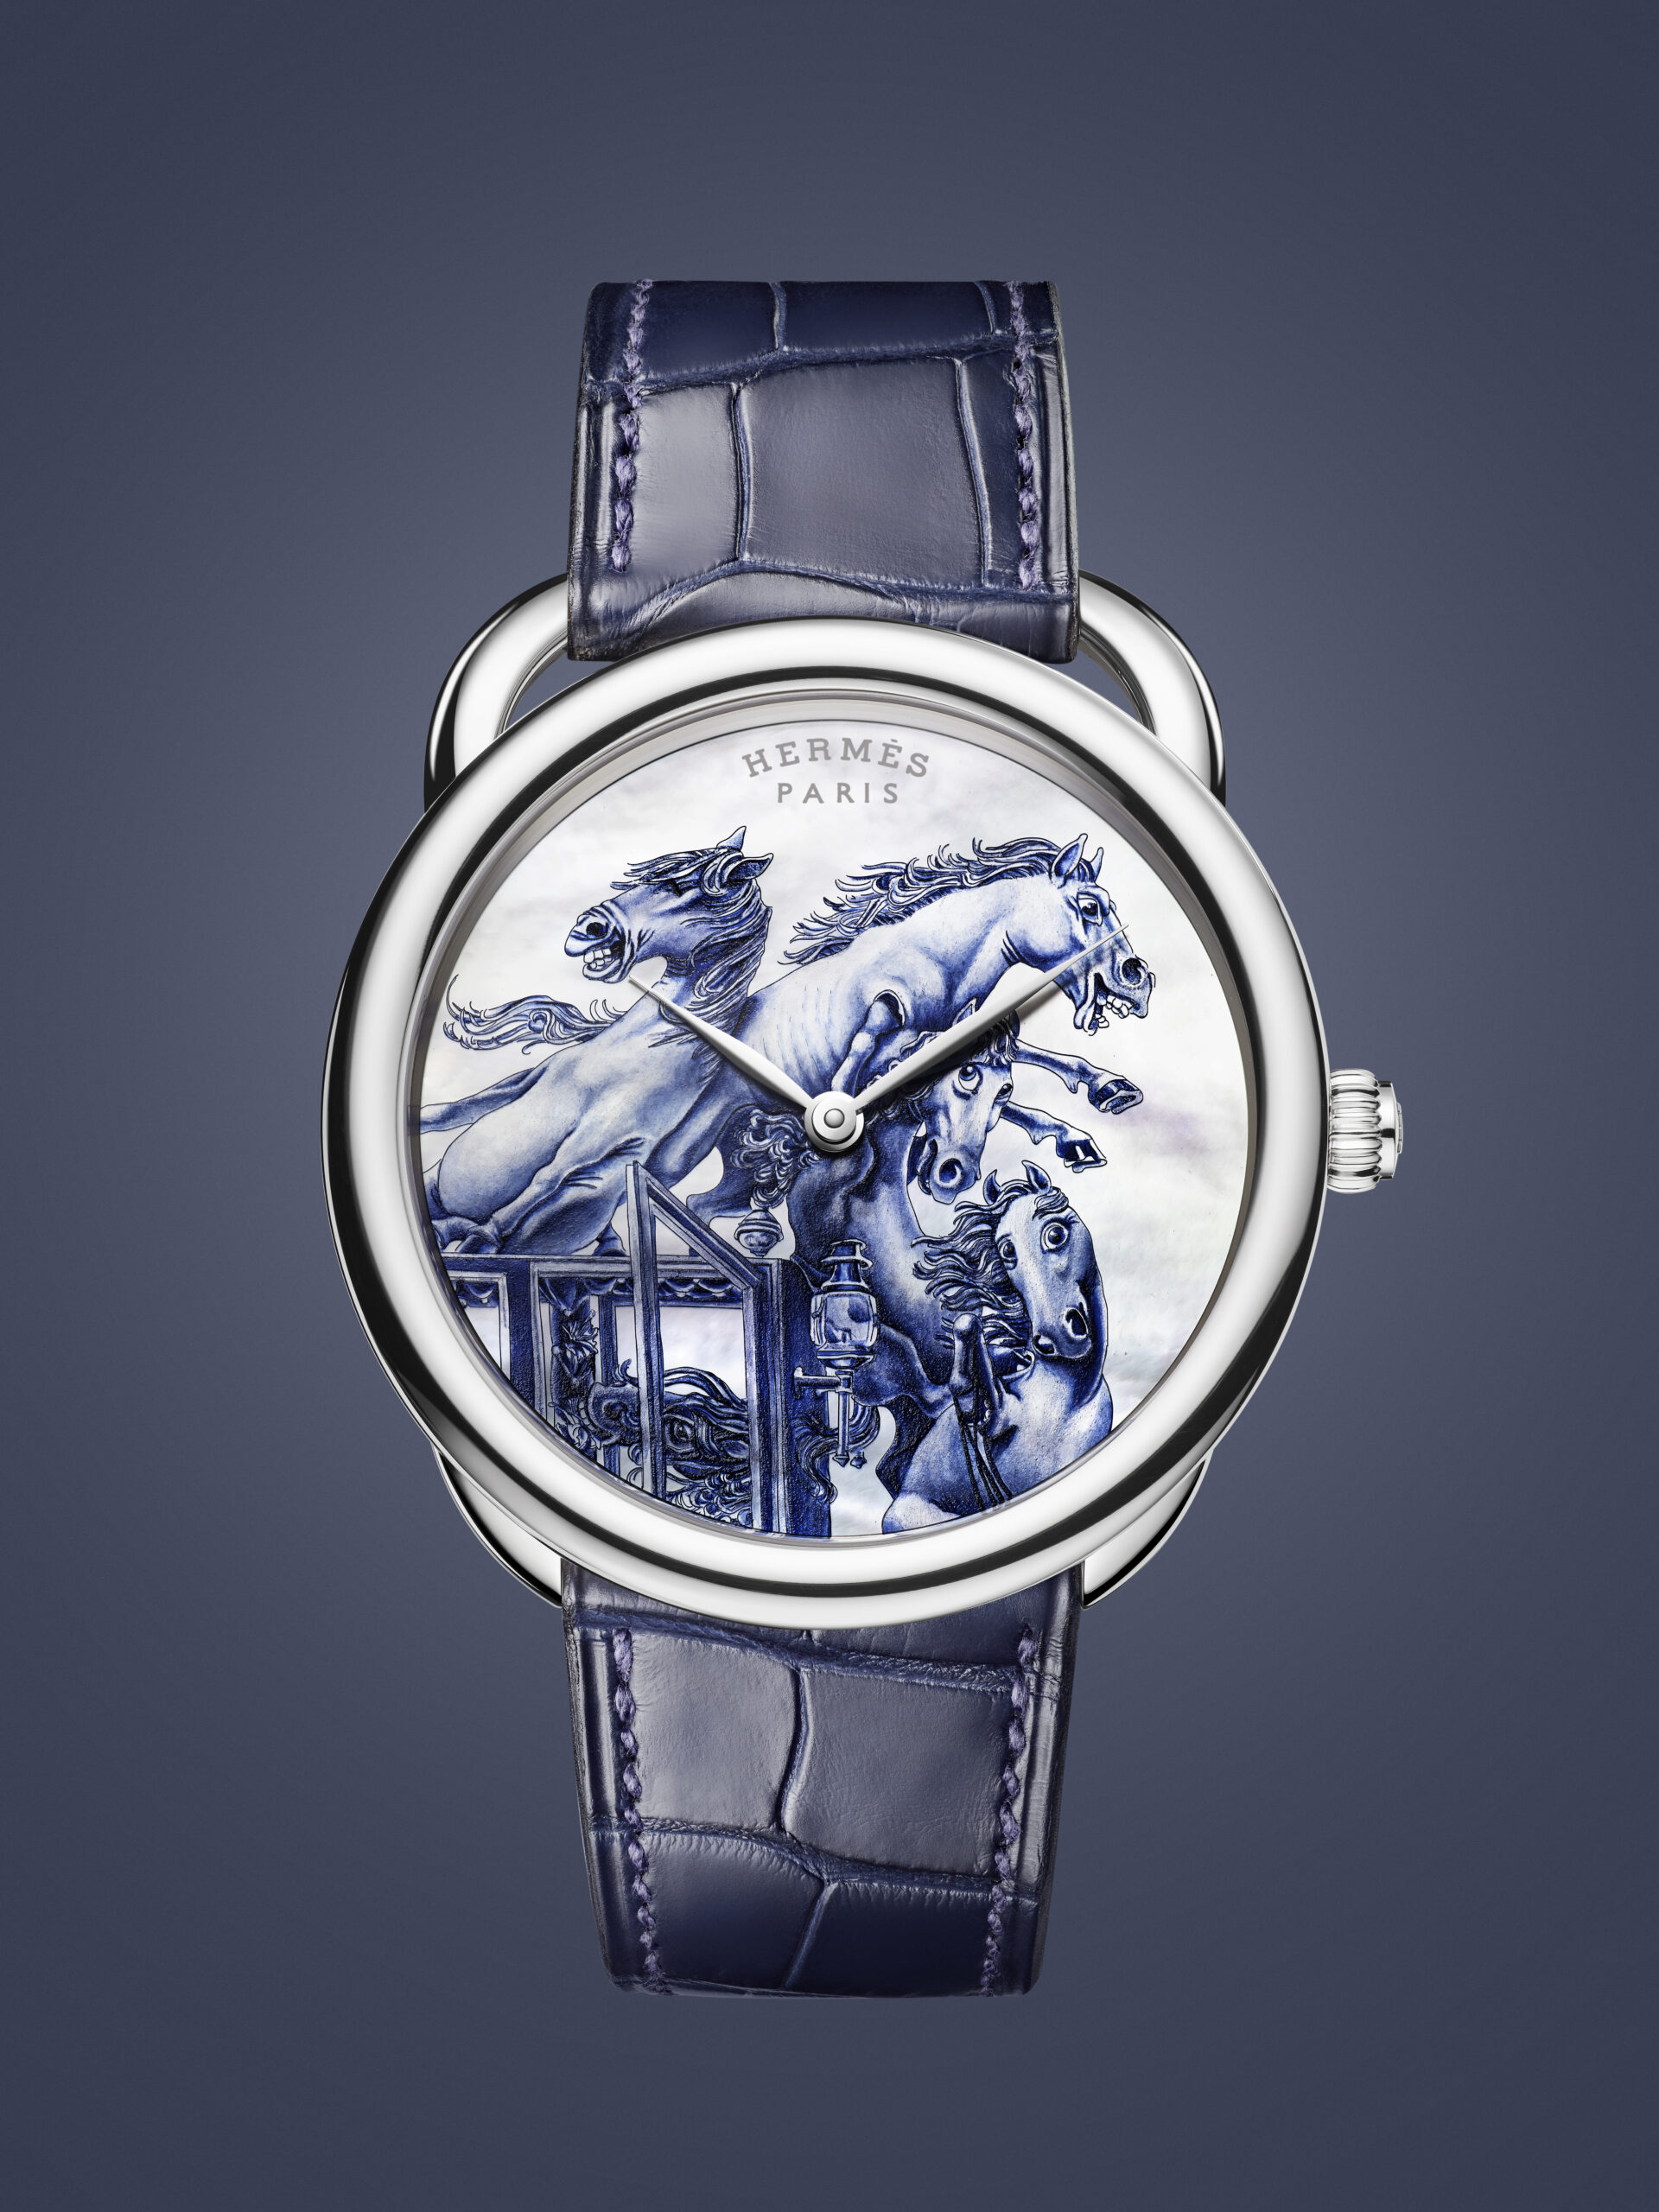 Hermes at Watches and Wonders